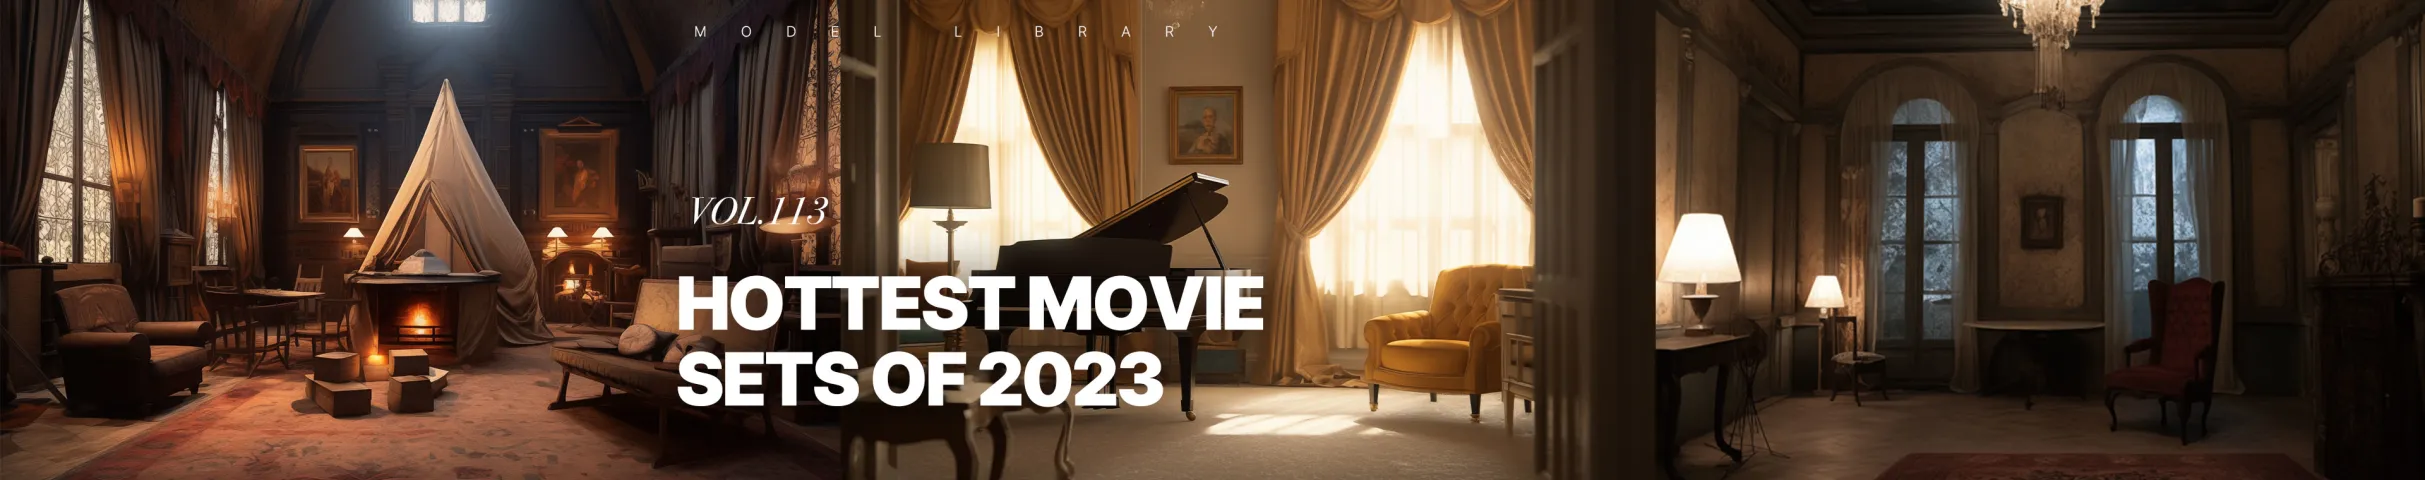 Hottest Movie Sets of 2023